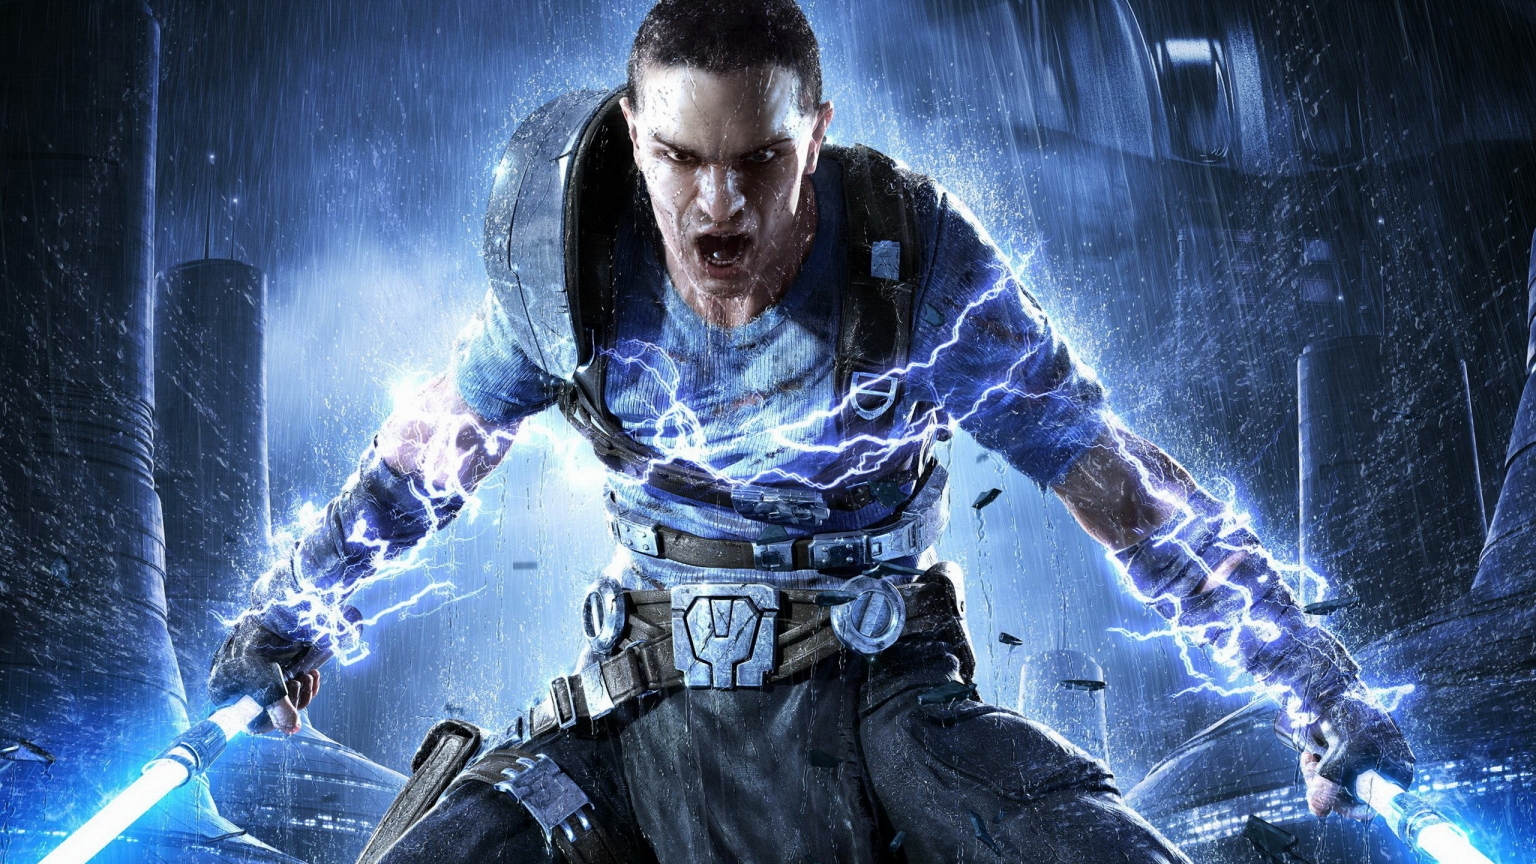 Star Wars Force Unleashed for 1536 x 864 HDTV resolution